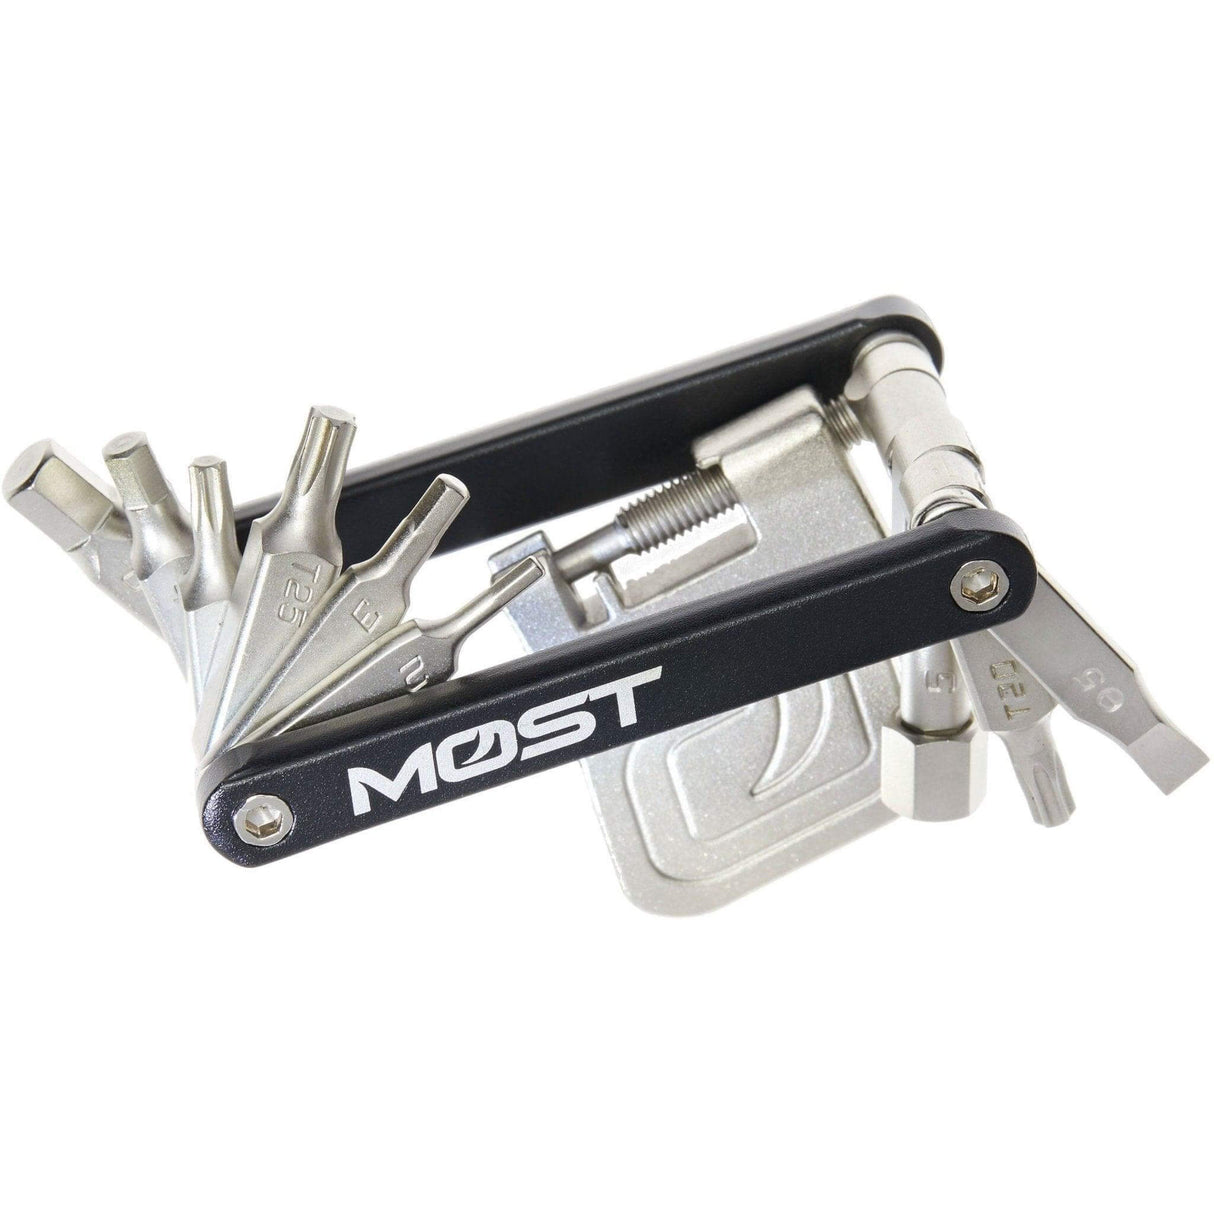 MOST Most Iron 11 Multitool | Strictly Bicycles 